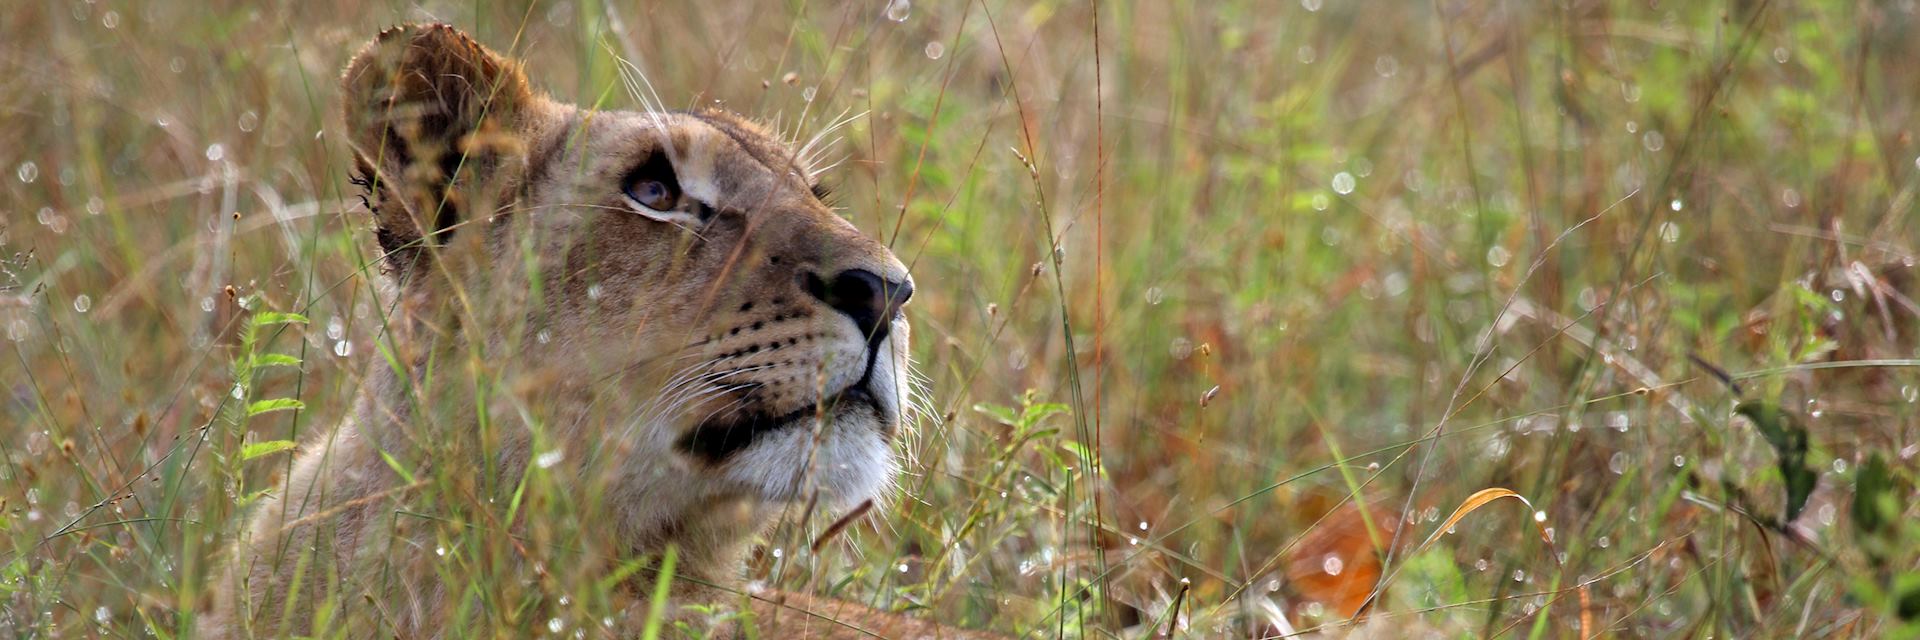 Lioness in South Luangwa National Park